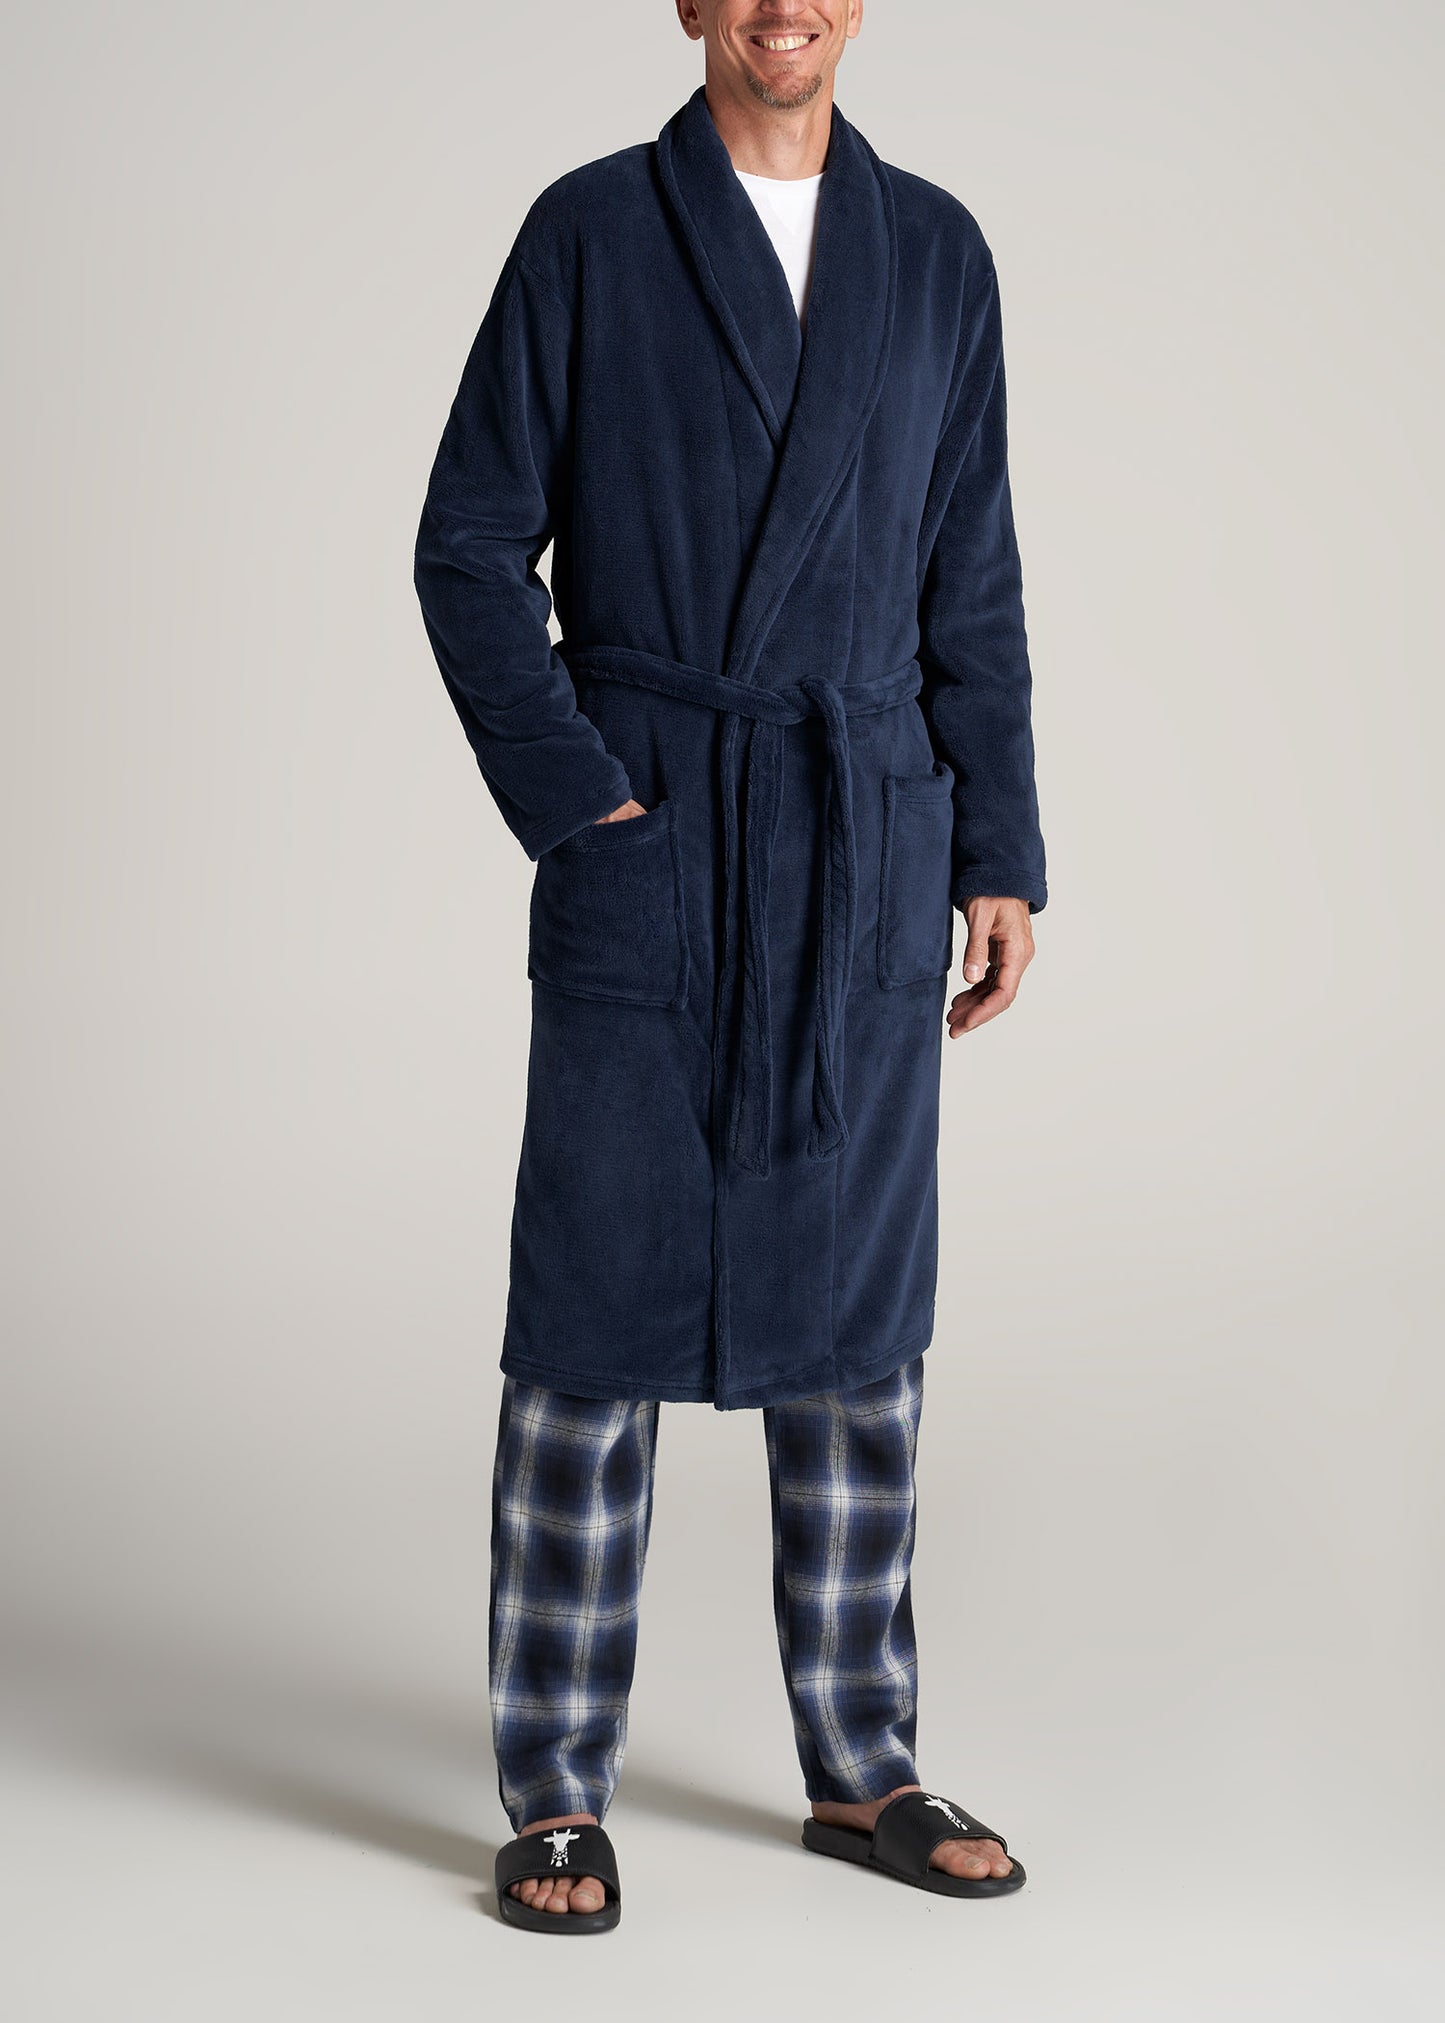 Luxury Robes and Slippers for Men | Barefoot Dreams® Official Site -  Loungewear, Apparel, Blankets